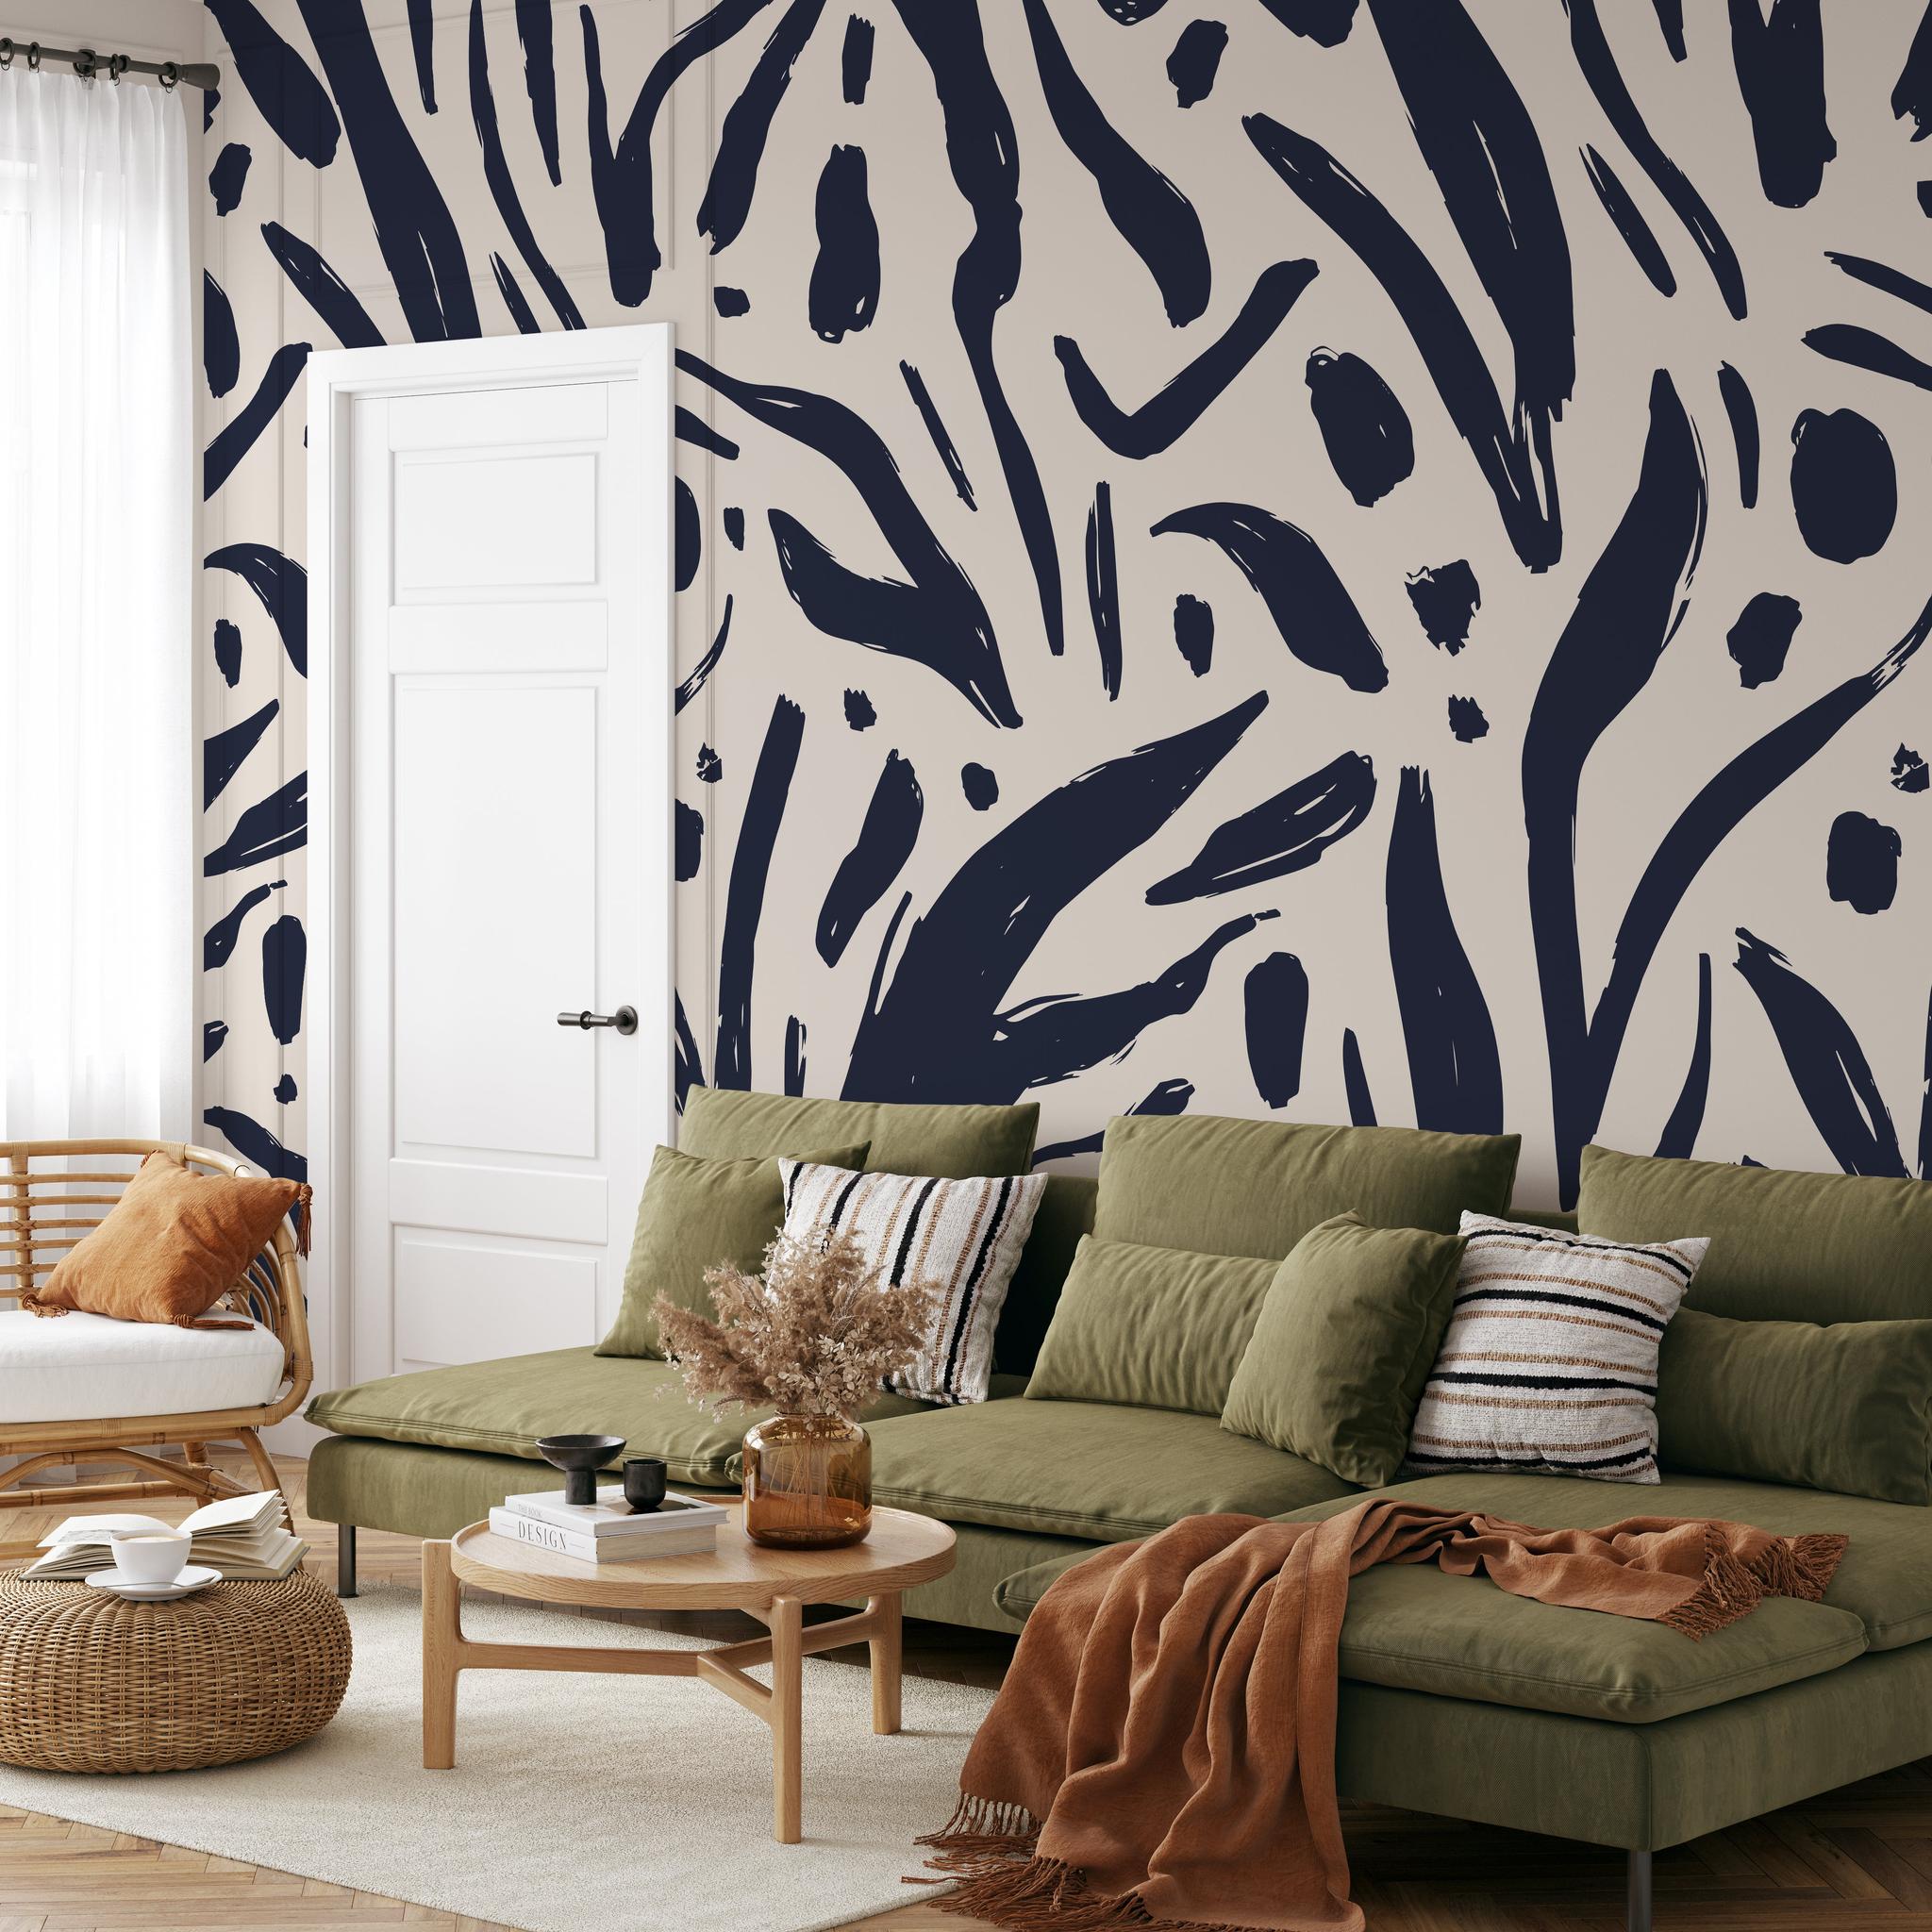 "Wall Blush Signe Wallpaper featured in stylish living room with green sofa and modern decor."